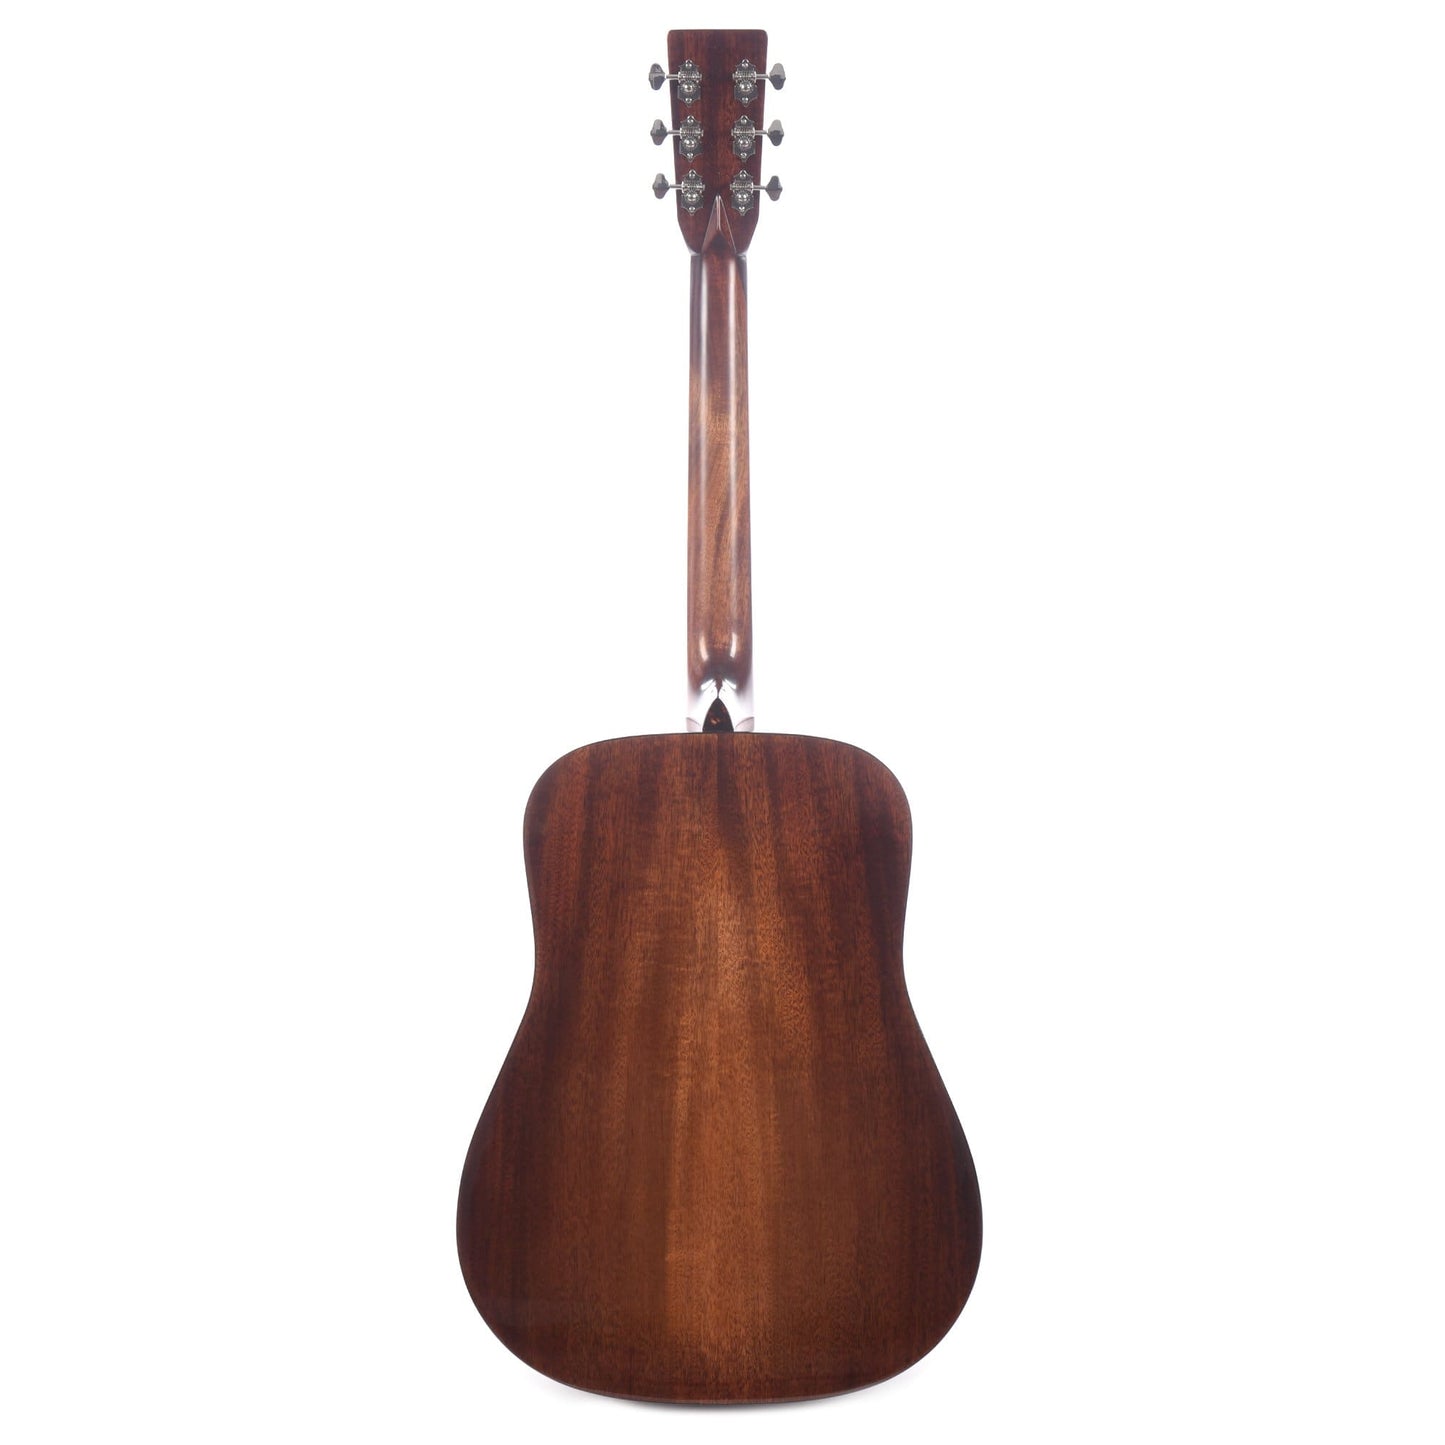 Eastman Traditional Dreadnought Thermo-Cured Sitka/Mahogany Natural Acoustic Guitars / Dreadnought